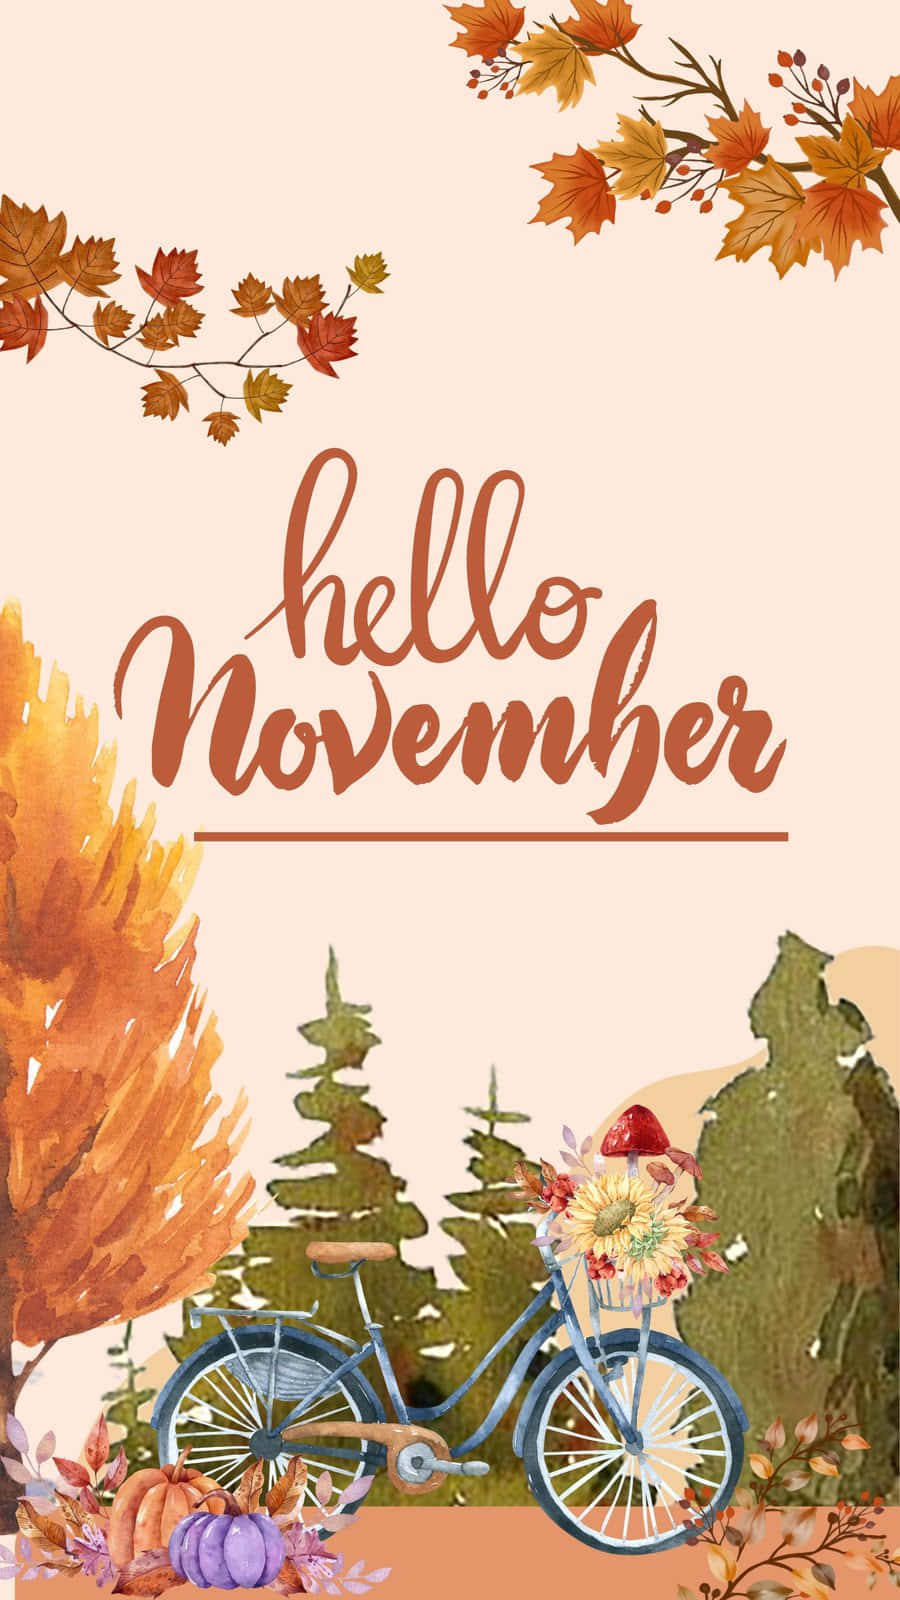 Enjoy the changing season with Aesthetic November! Wallpaper